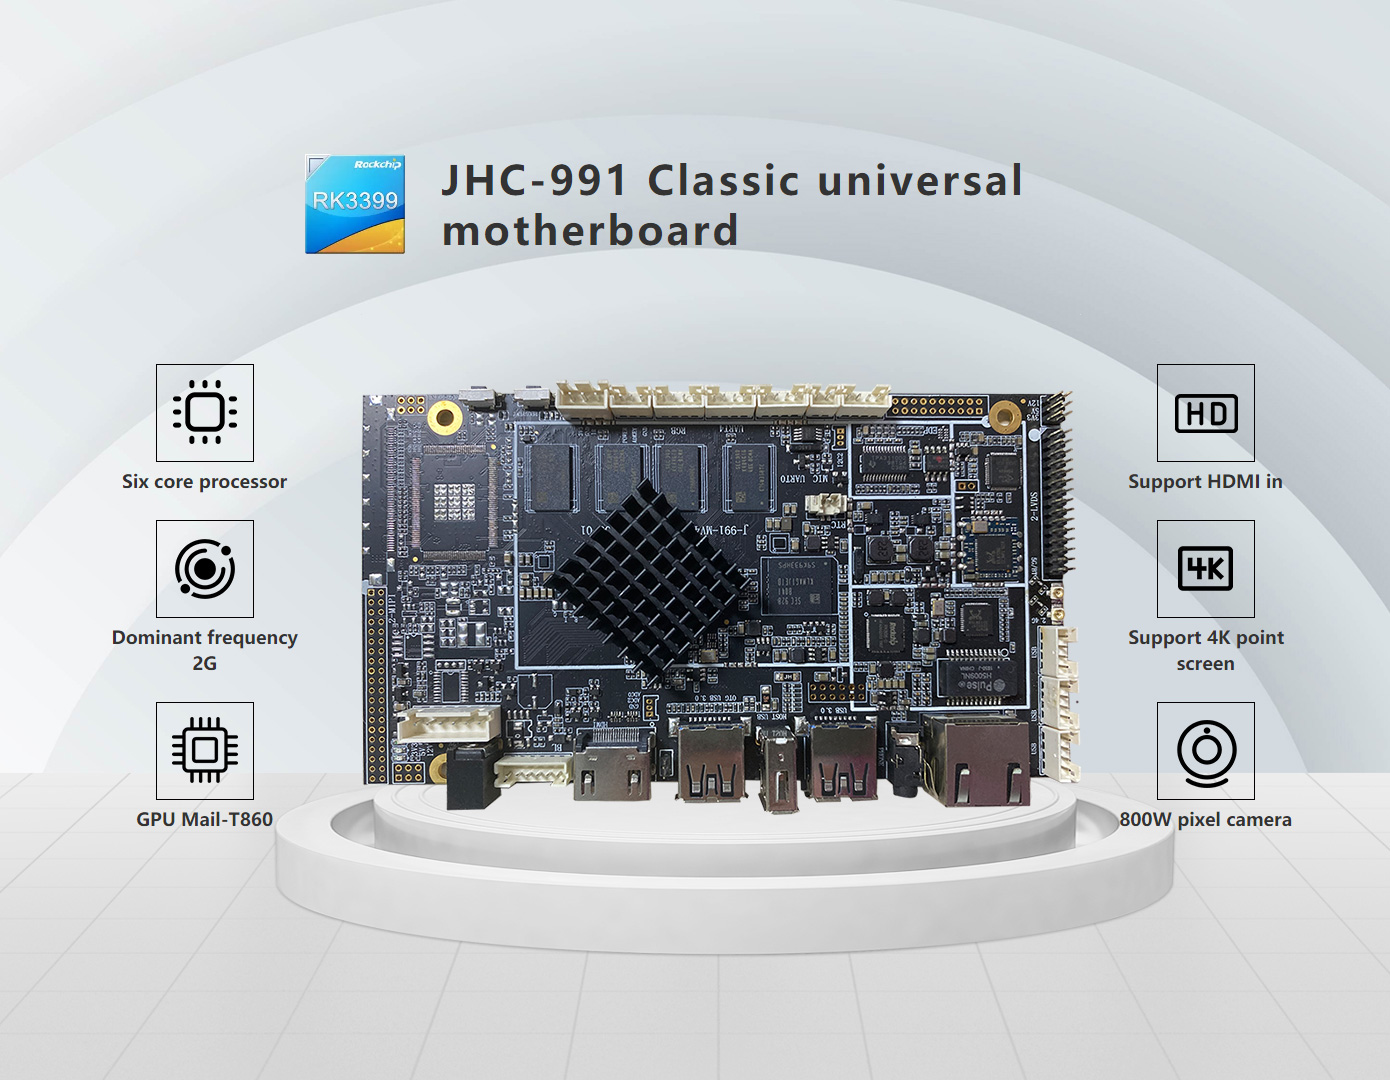 JHC-991 Classic universal motherboard